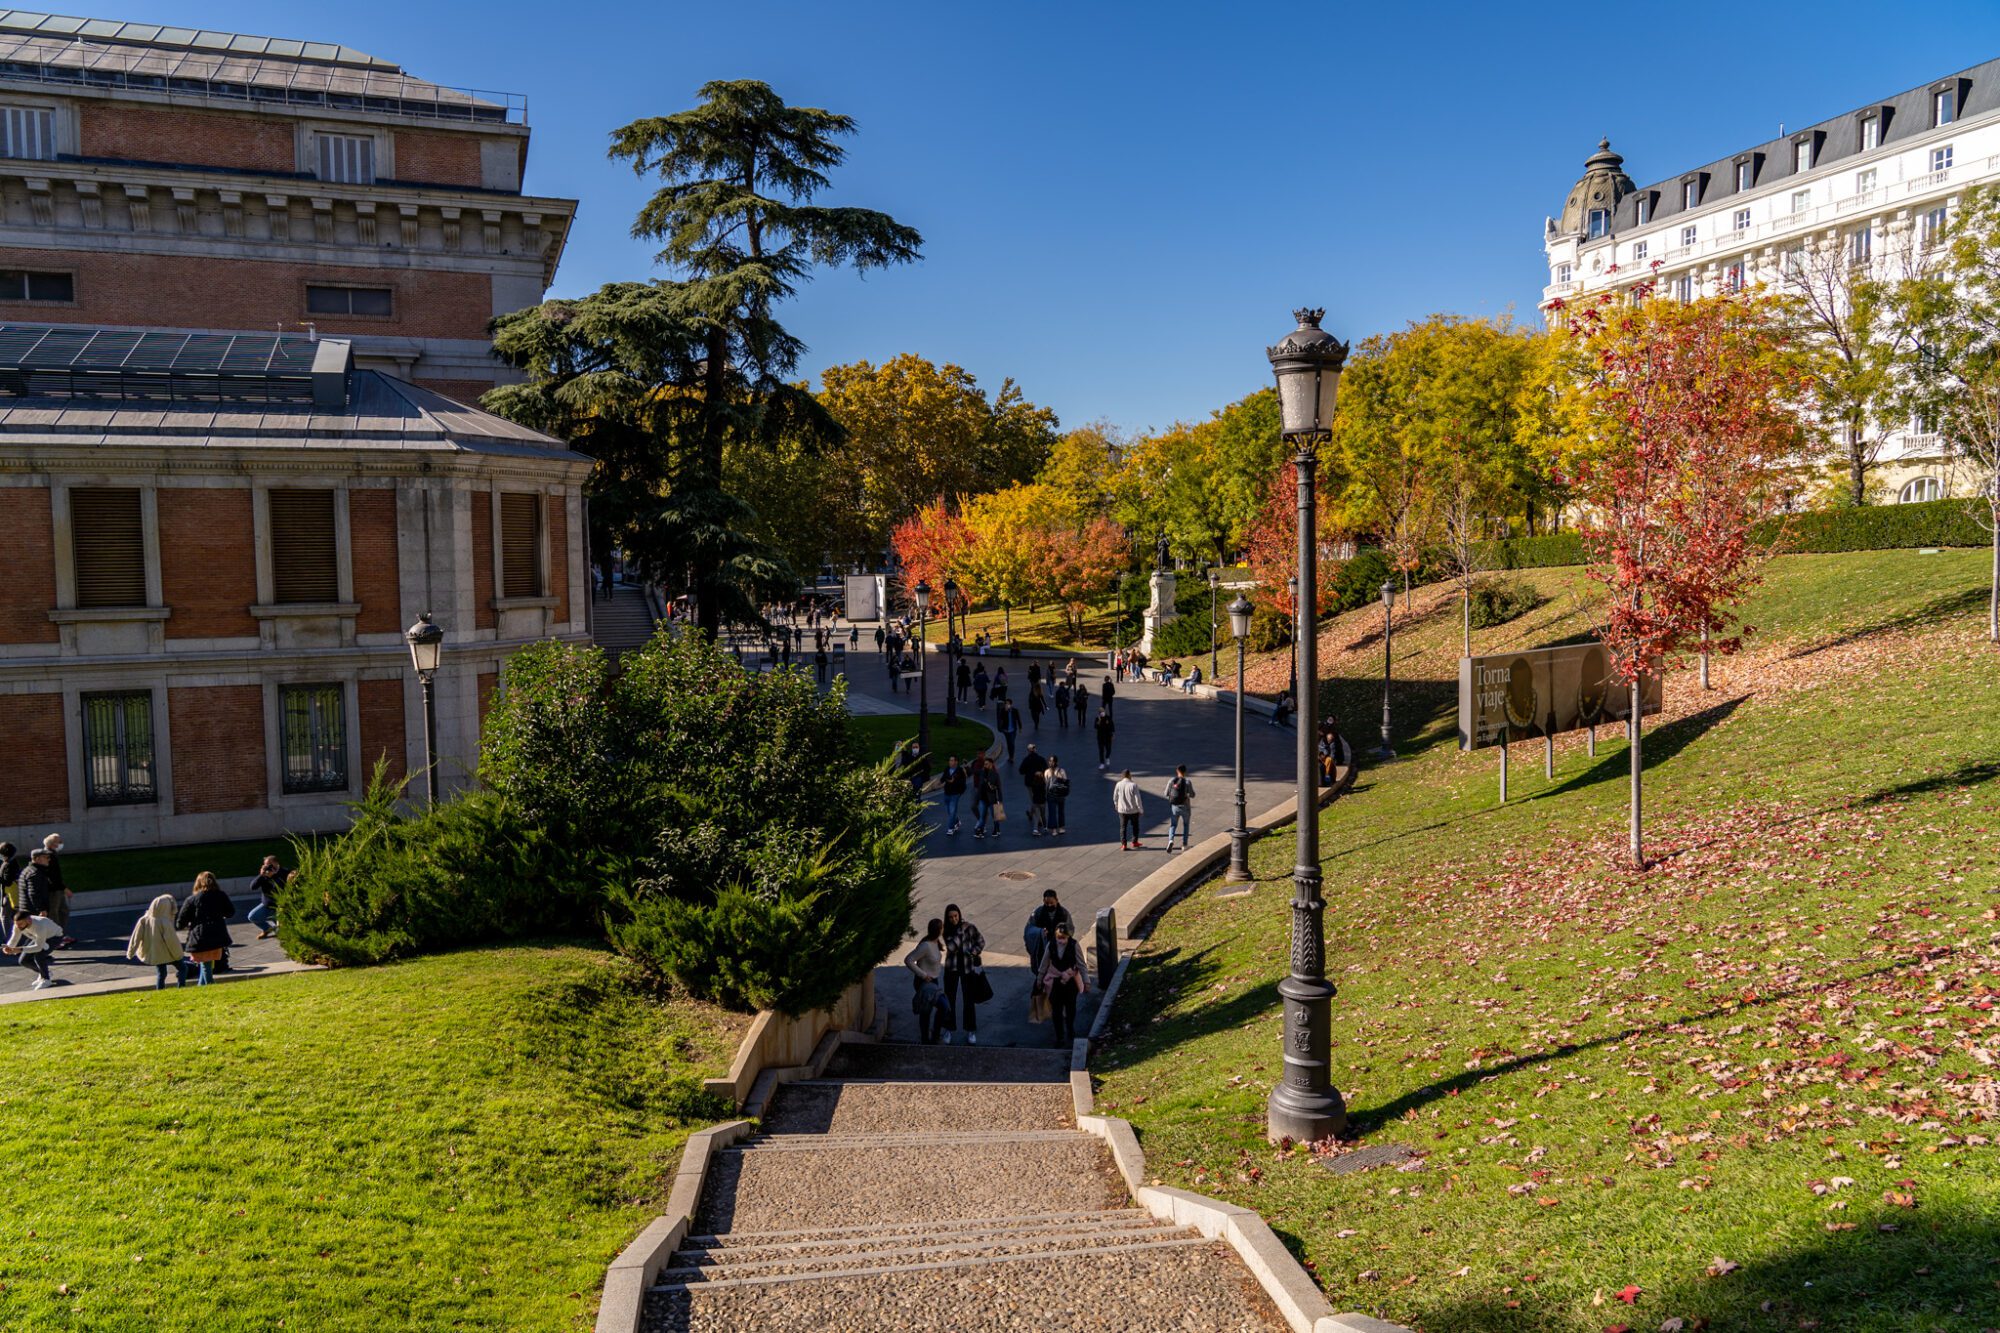 Top 20 Facts About City of Madrid - Discover Walks Blog